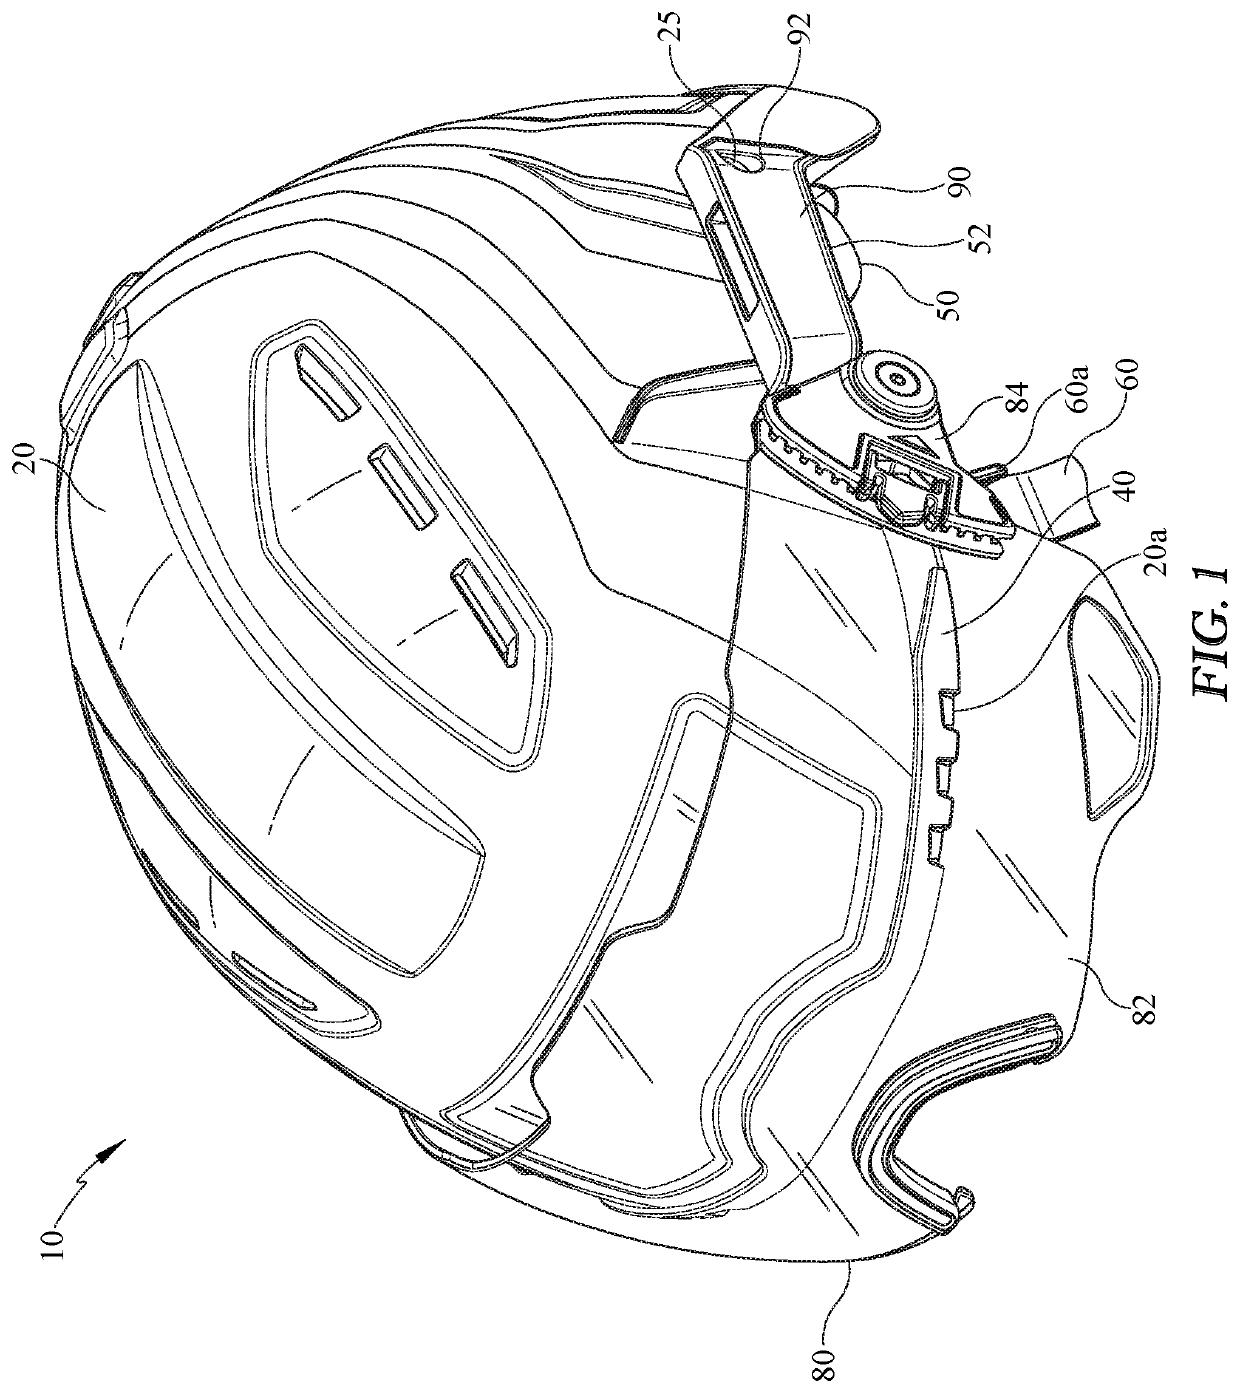 Protective helmet with attachment ring